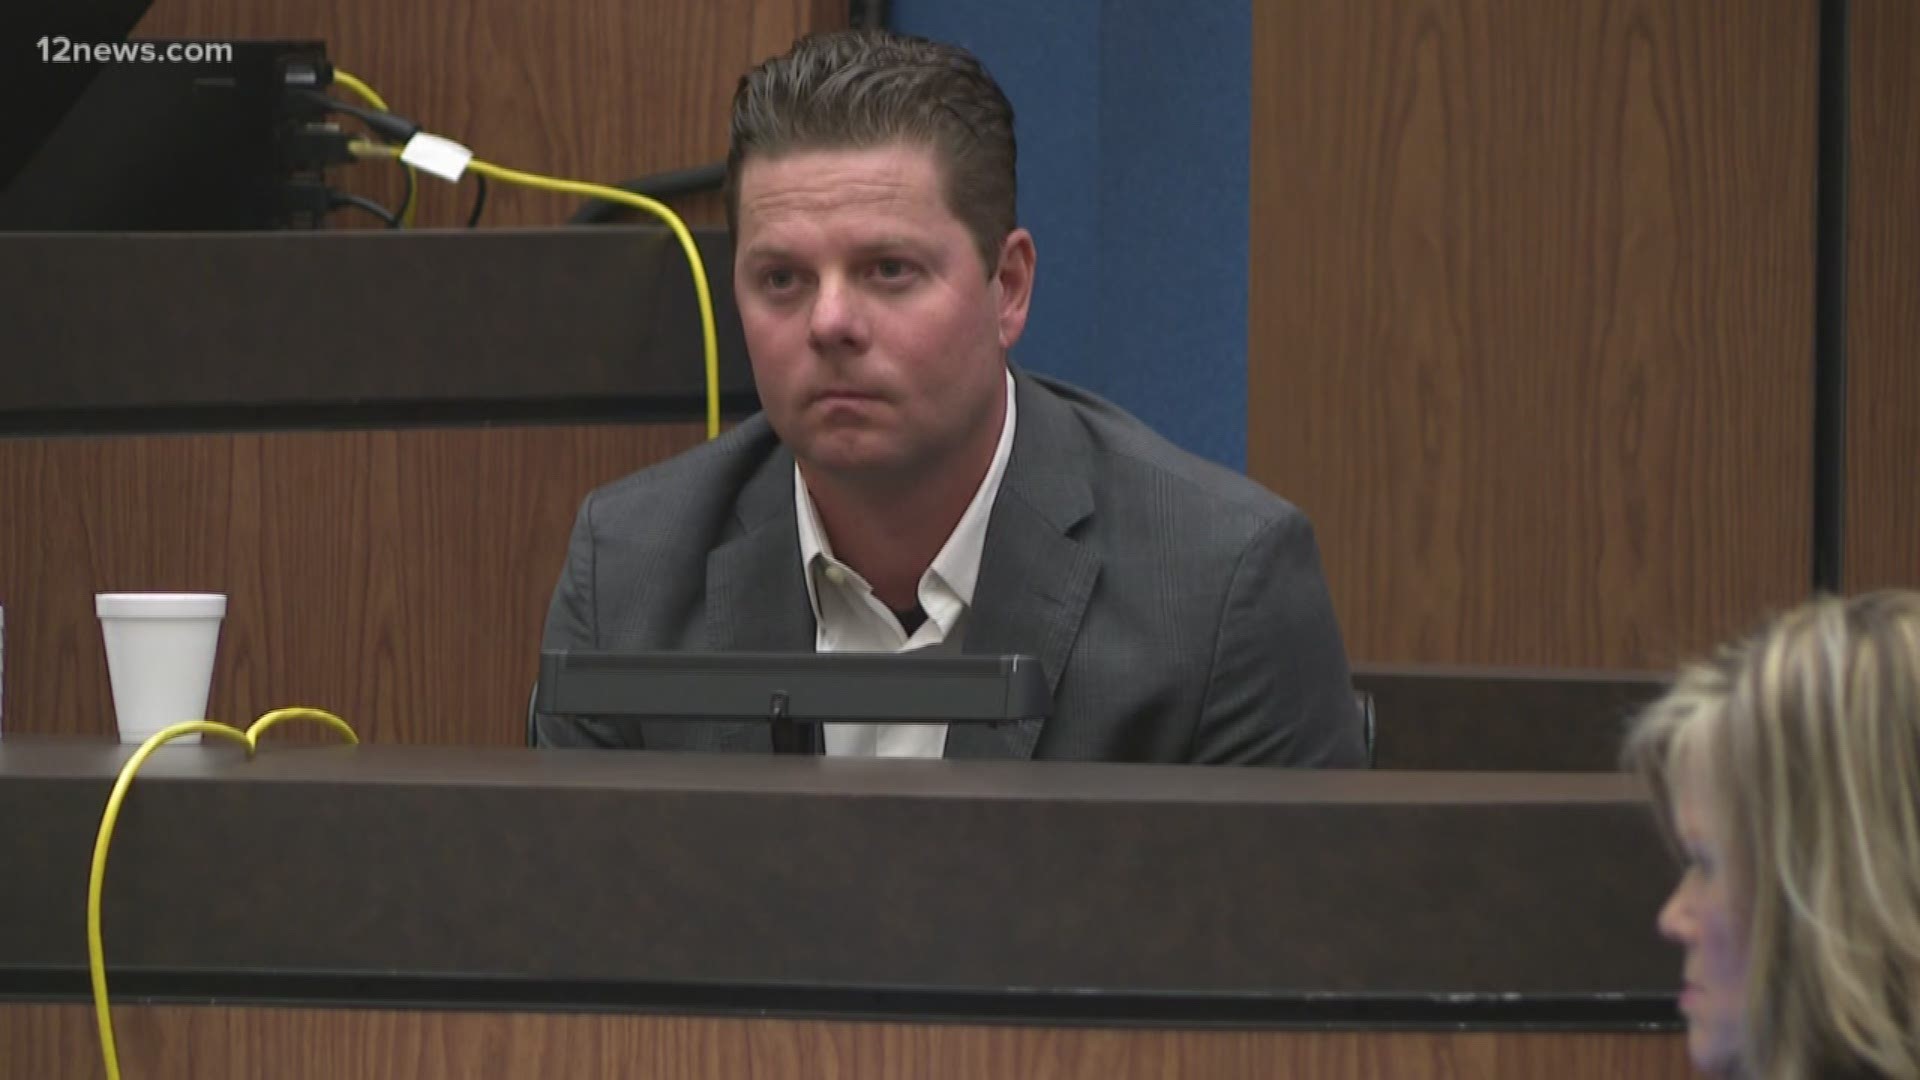 One week after the start of the trial for a man accused of killing a Tempe fire captain and former marine, one of Kyle Brayer's best friends takes the stand.